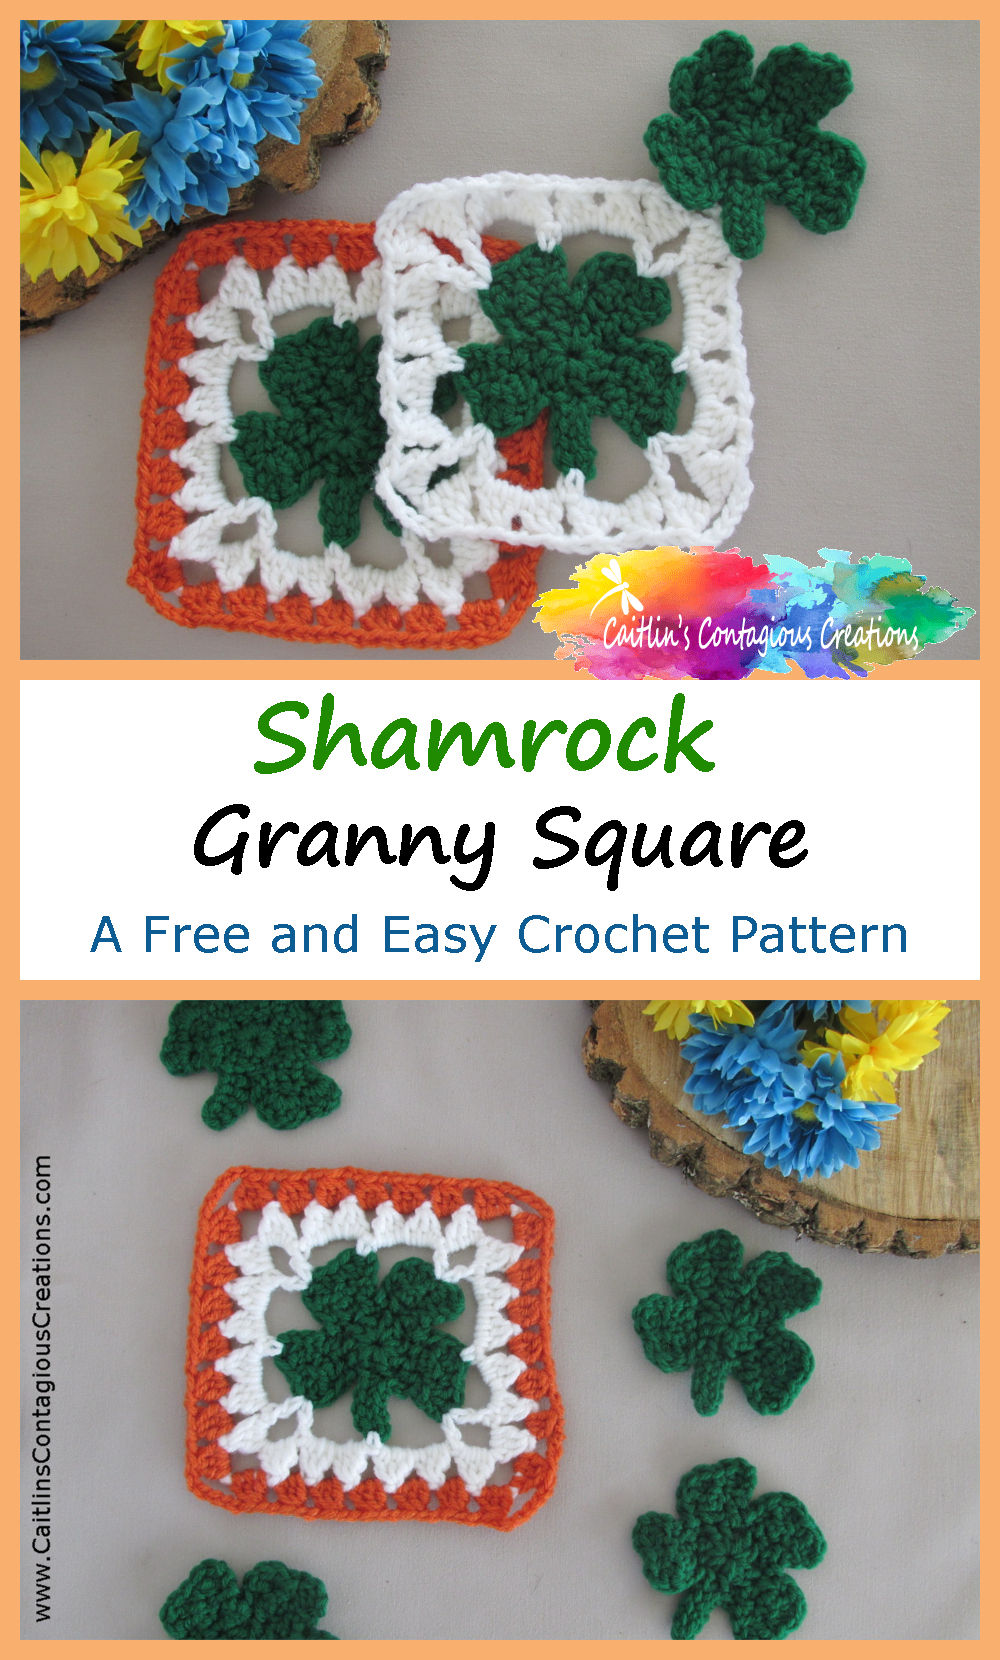 Free Shamrock Granny Square Crochet Pattern is perfect for St. Patrick's Day or all year long! Make a shawl or scarf, blanket, or even a laptop or tablet case with this versatile afghan square crochet pattern. The Irish flower or four 4 leaf clover is said to be good luck, so grab your hook and get started today!